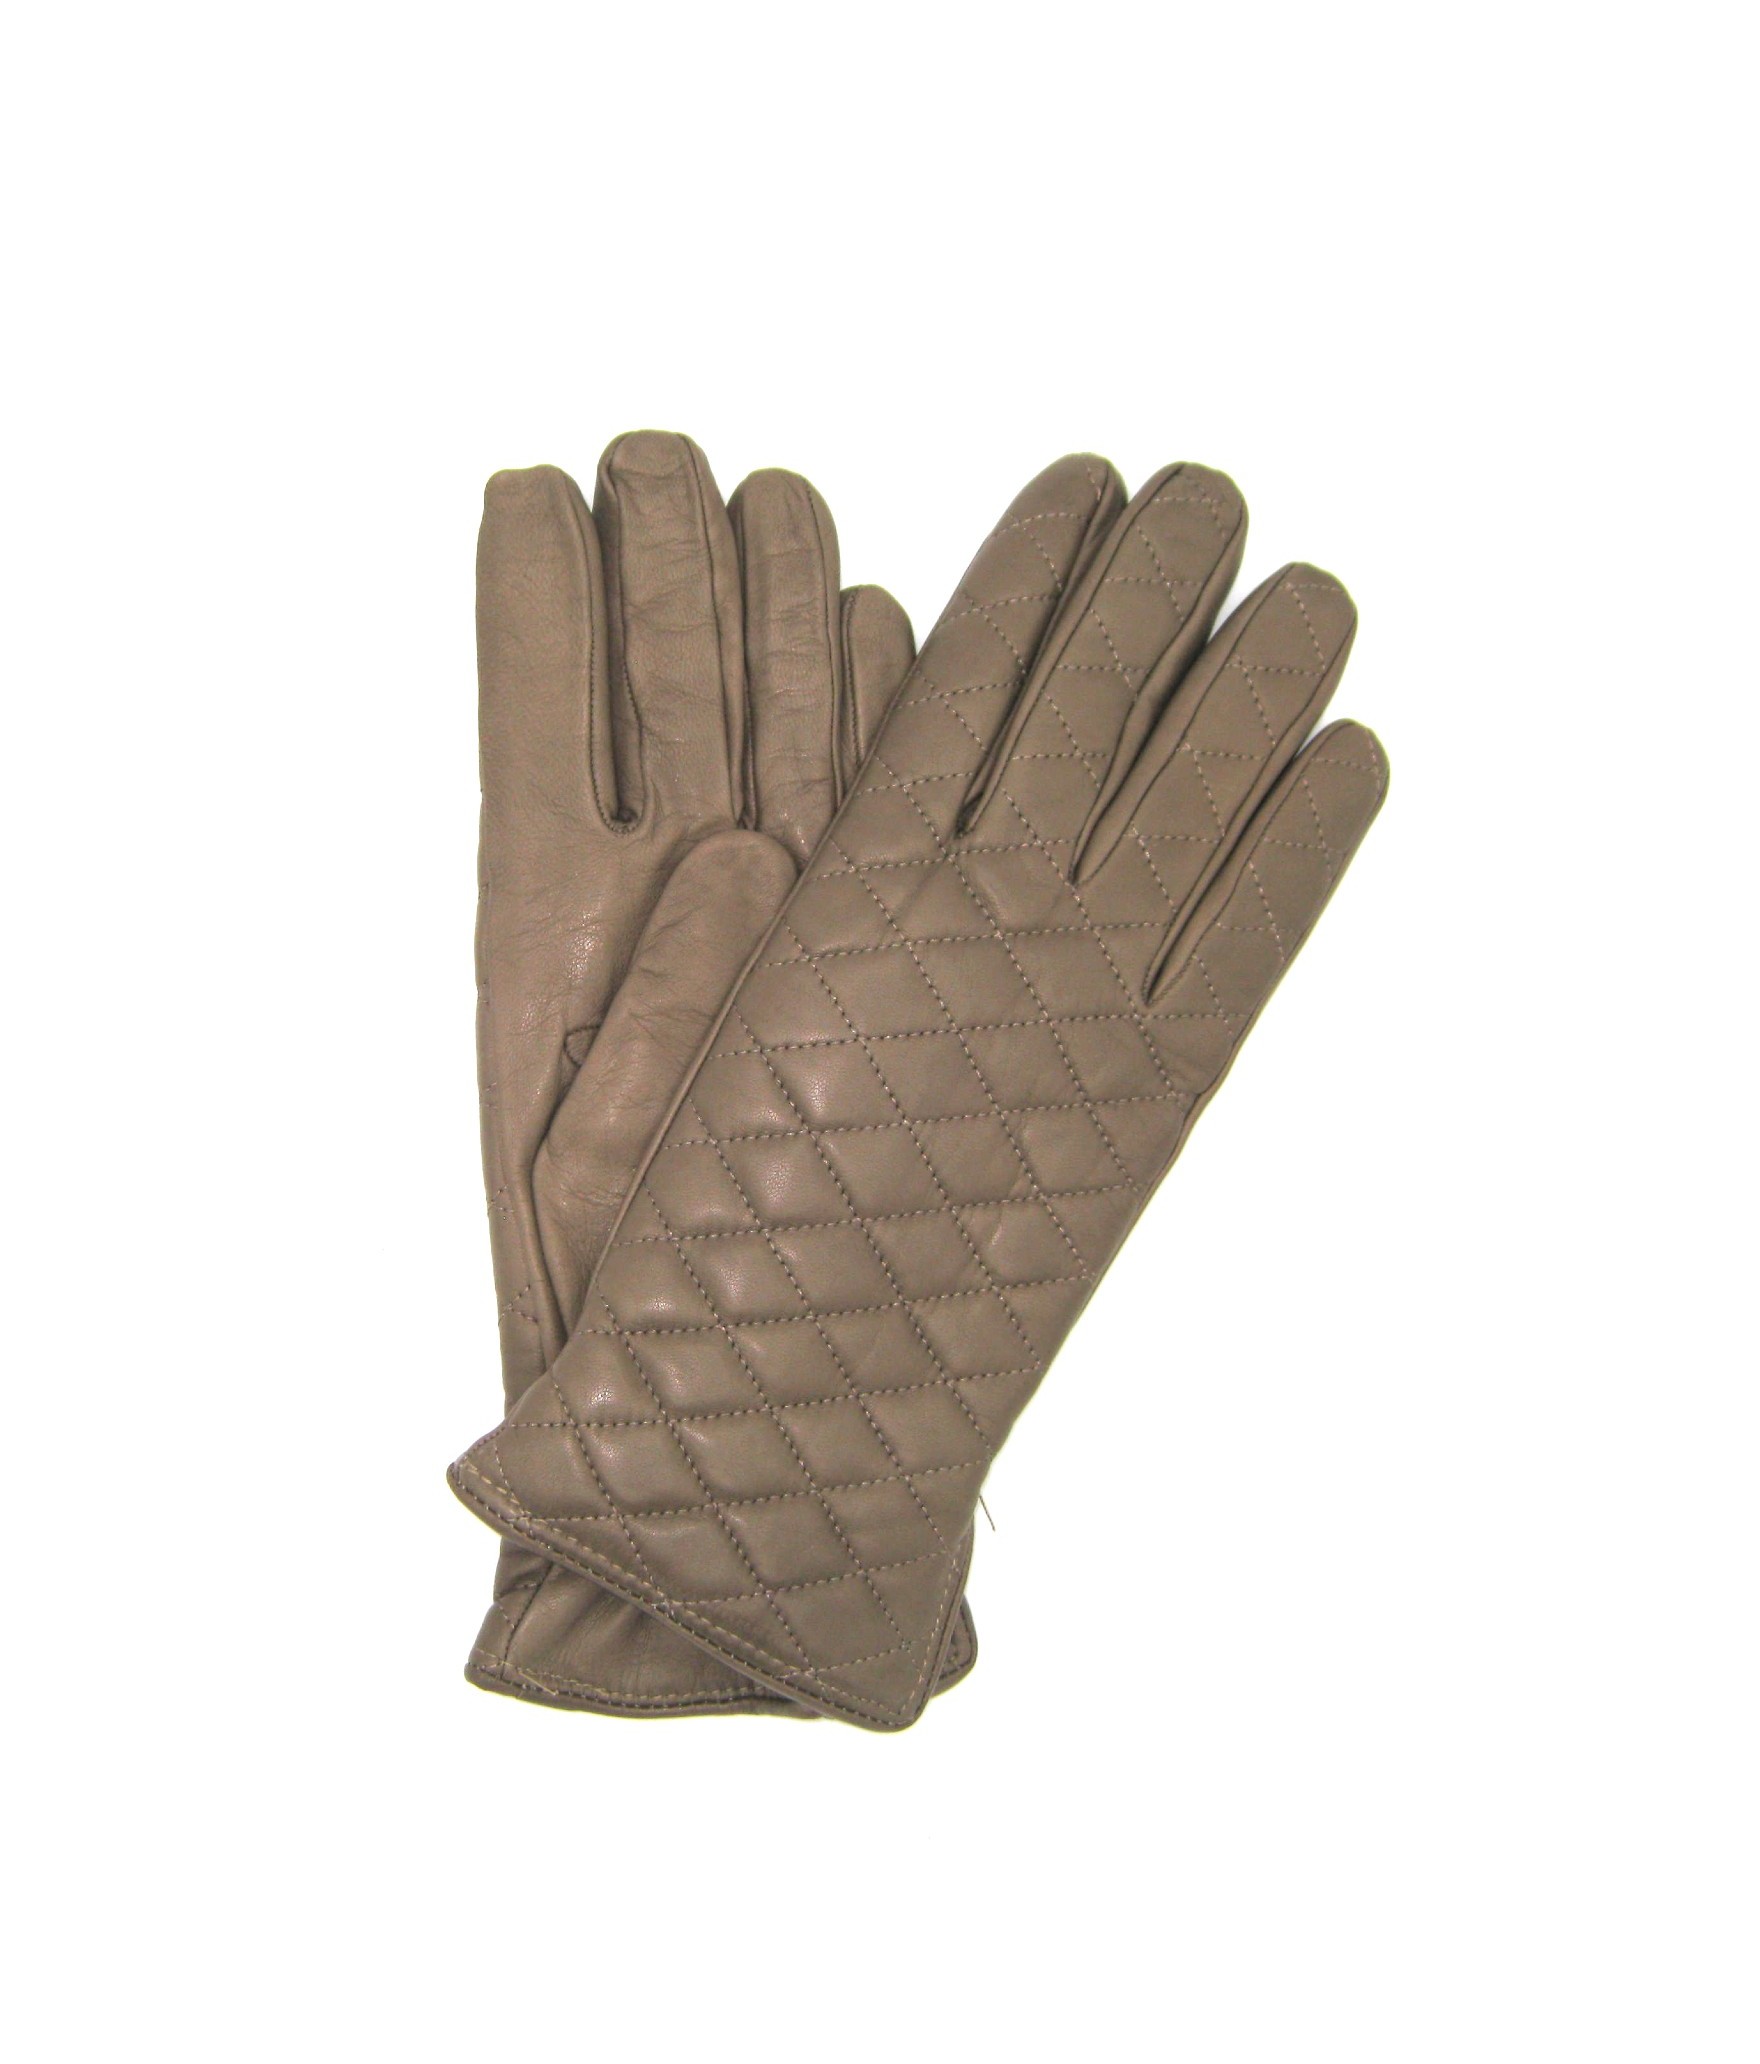 Quilted Nappa leather gloves 2bt cashmere lined  Mud